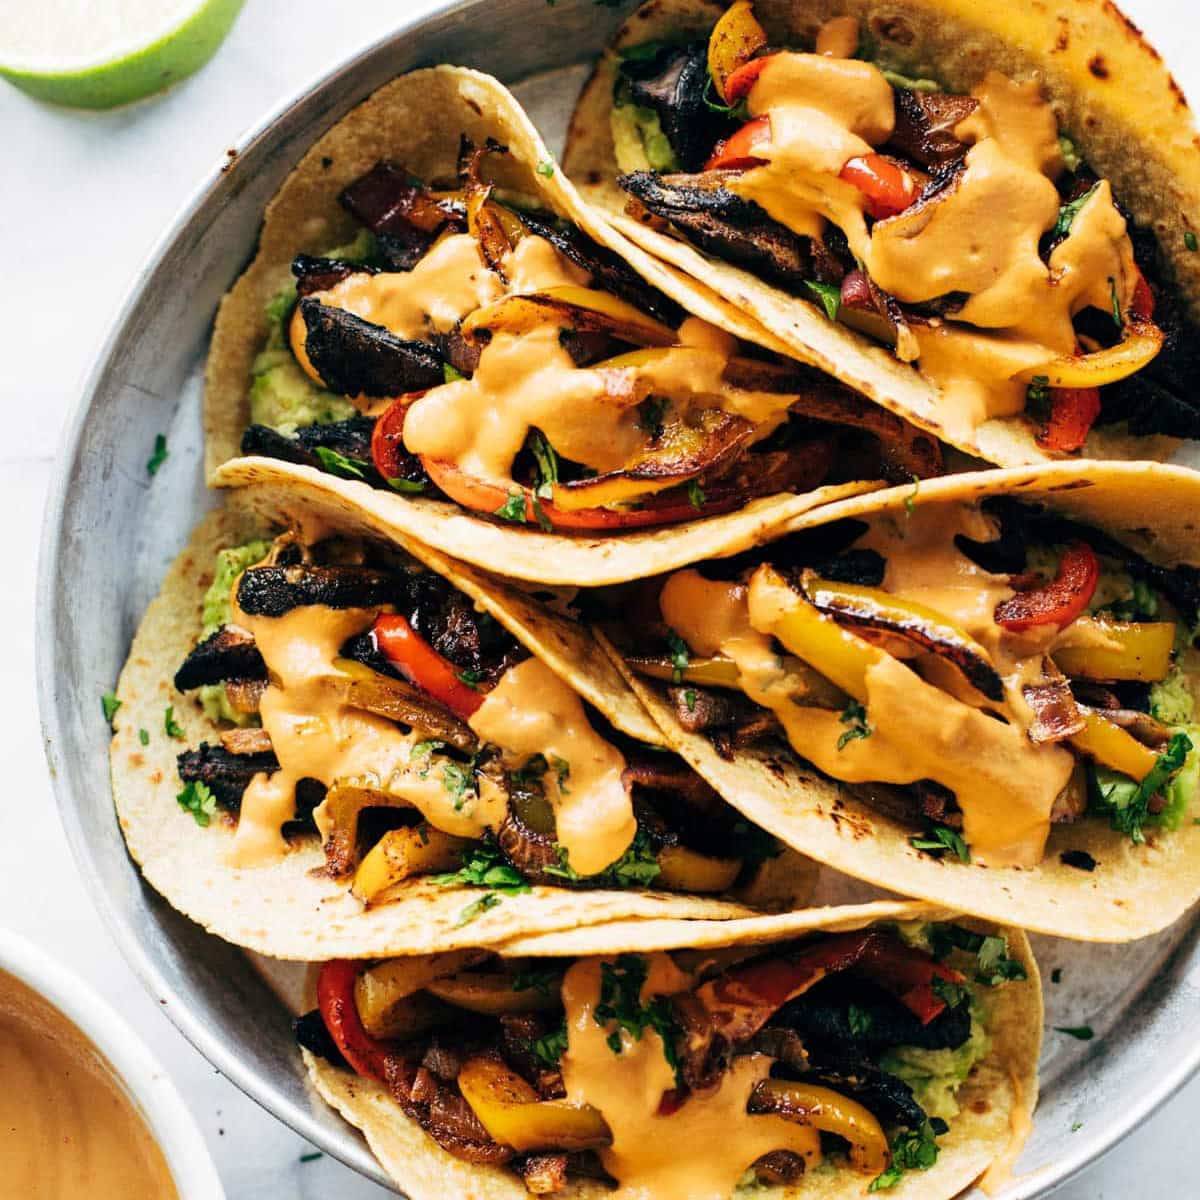 Fajitas with bell peppers, mushrooms, and cashew queso.